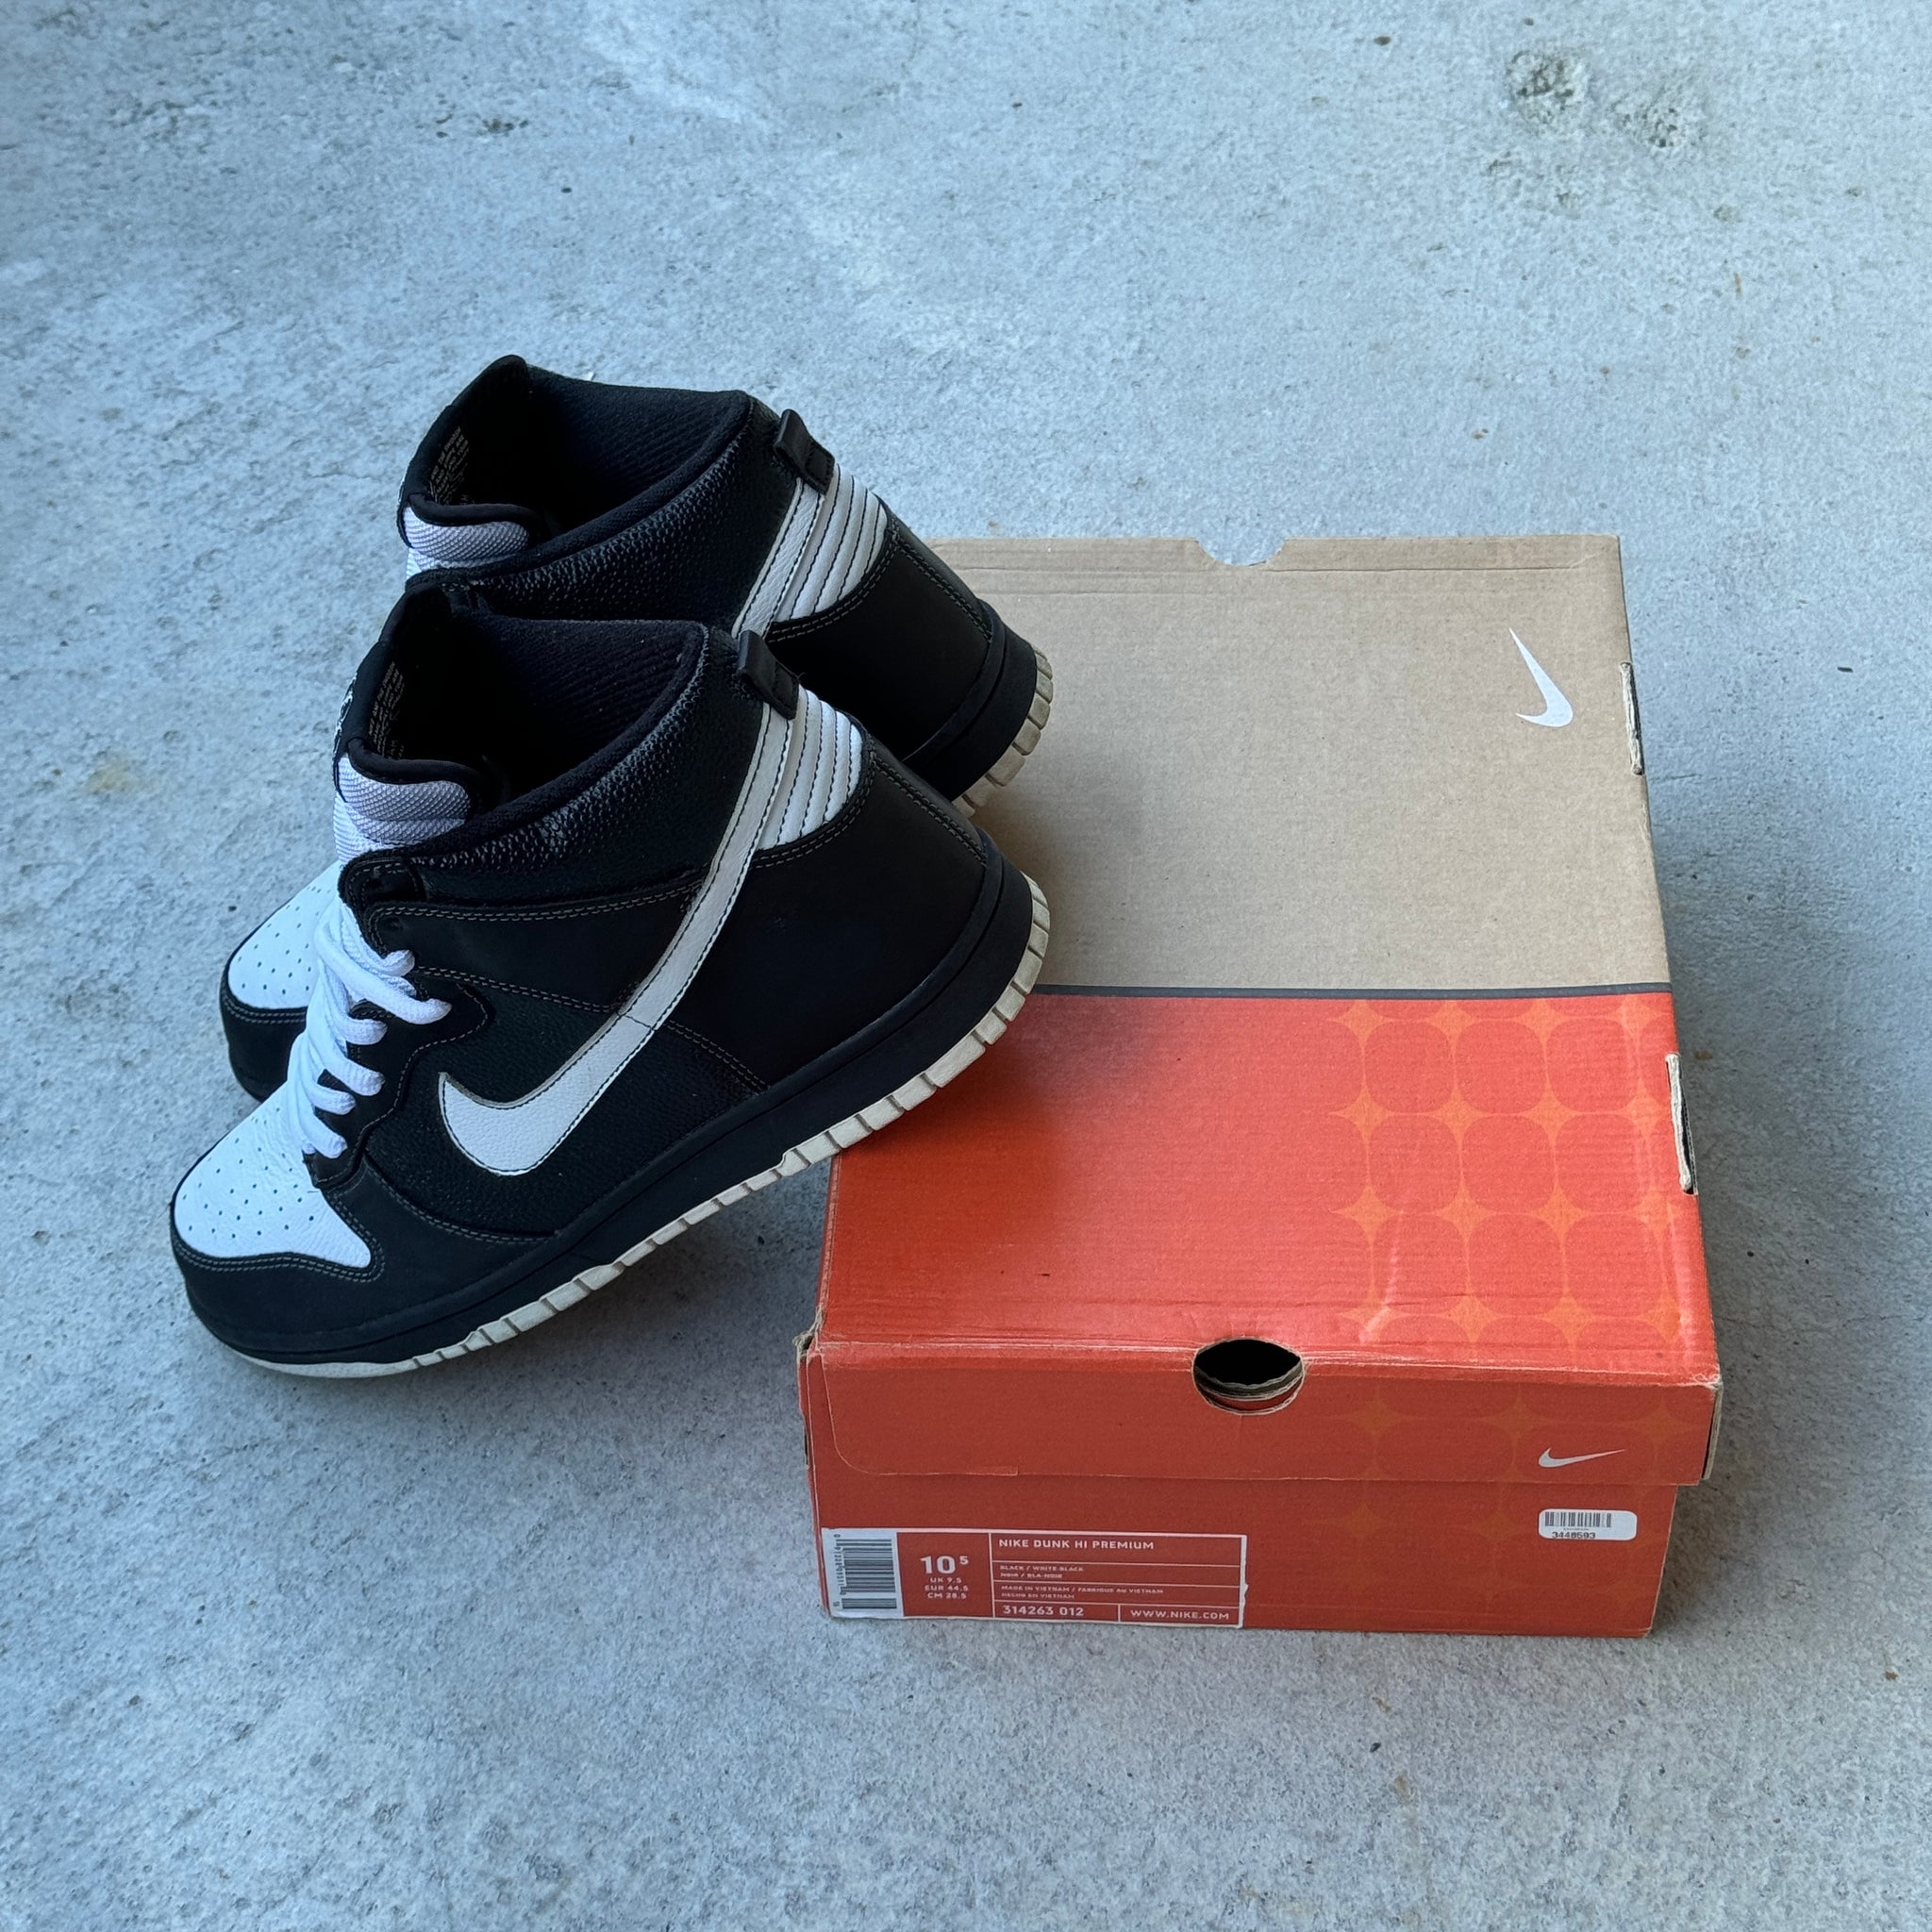 10.5 US - NIKE DUNK HIGH CLERKS NORT RECON W BOX 2006